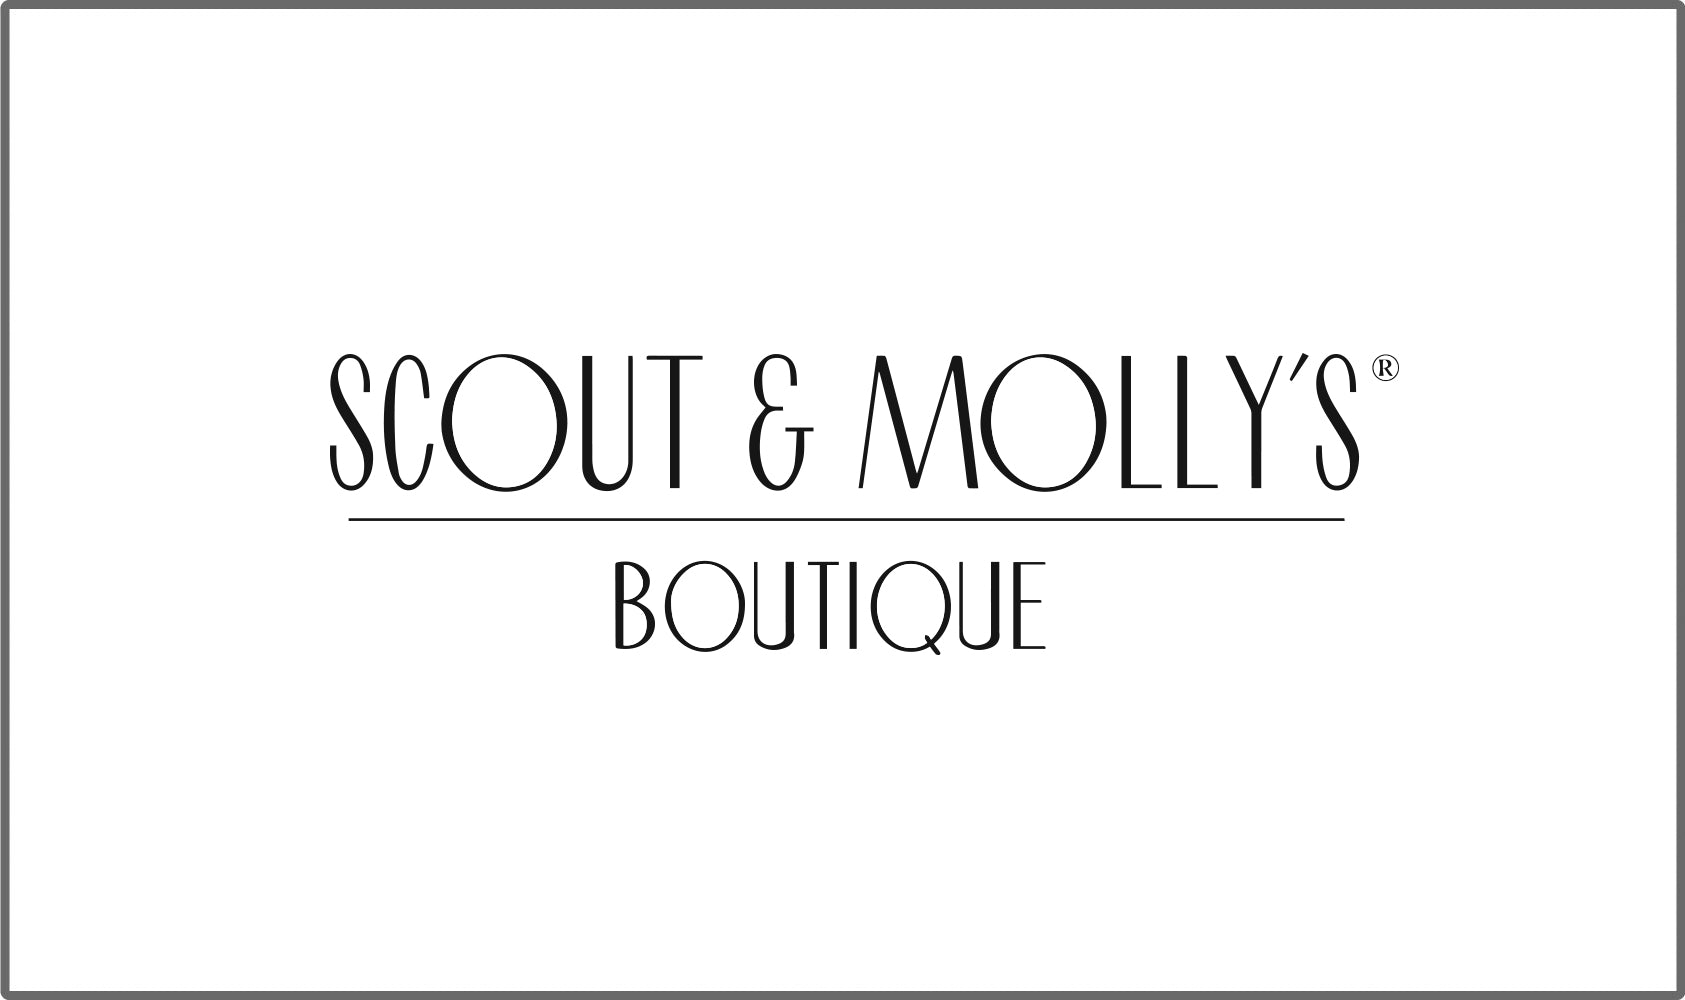 AllRetailers_BW_SCOUT_and_MOLLYS_1.jpg